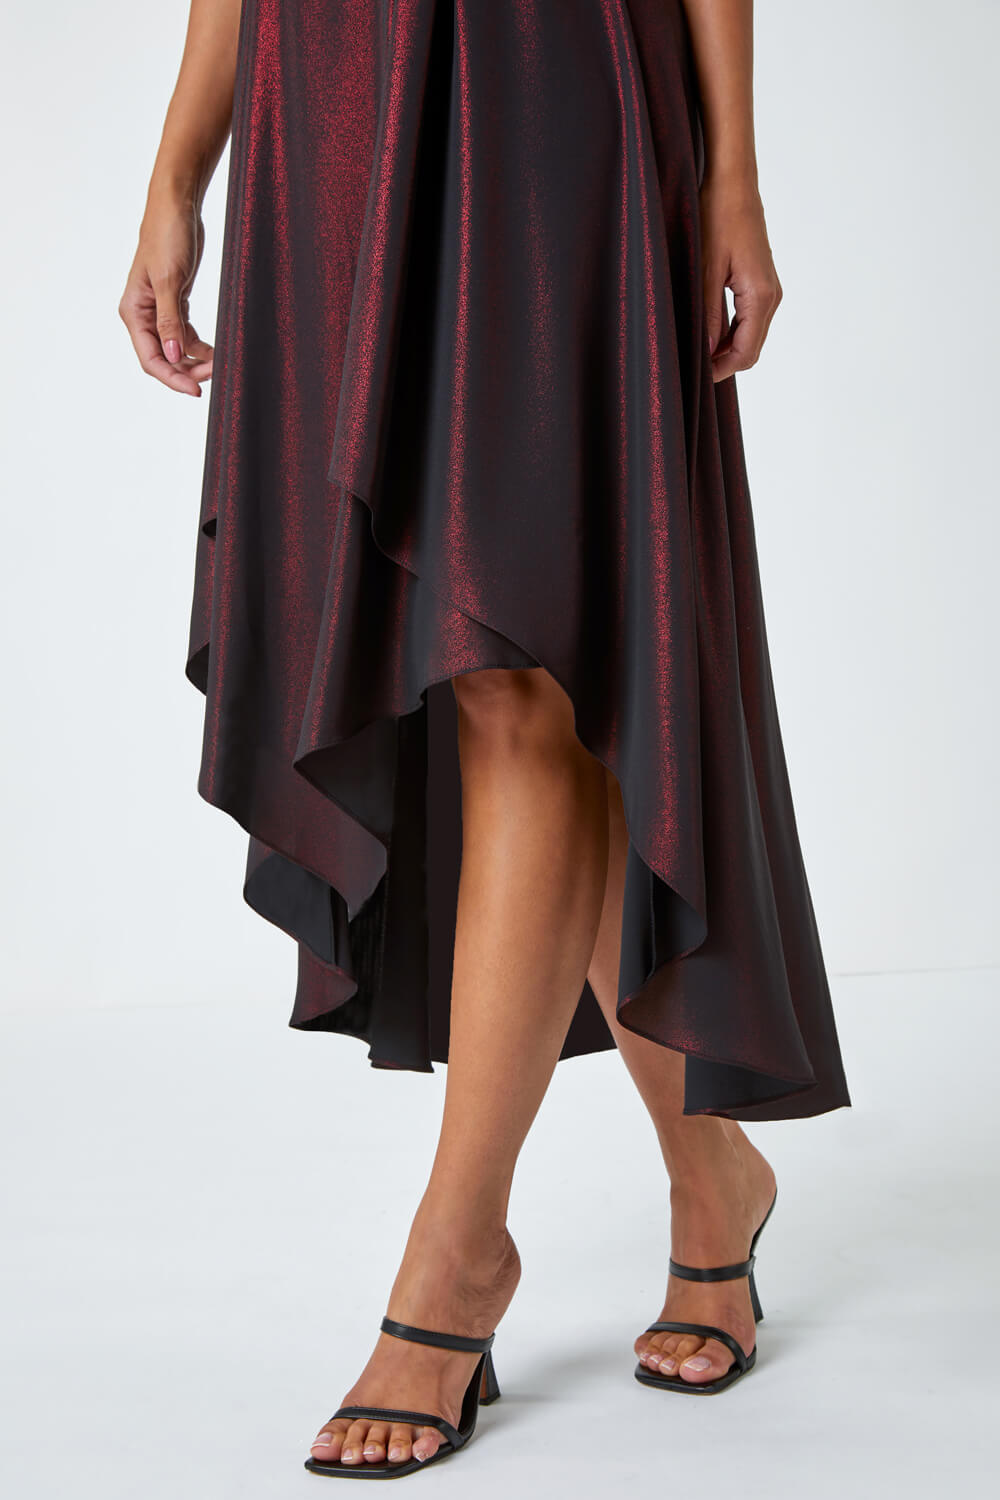 Red Pleat Detail Shimmer Midi Dress, Image 5 of 5